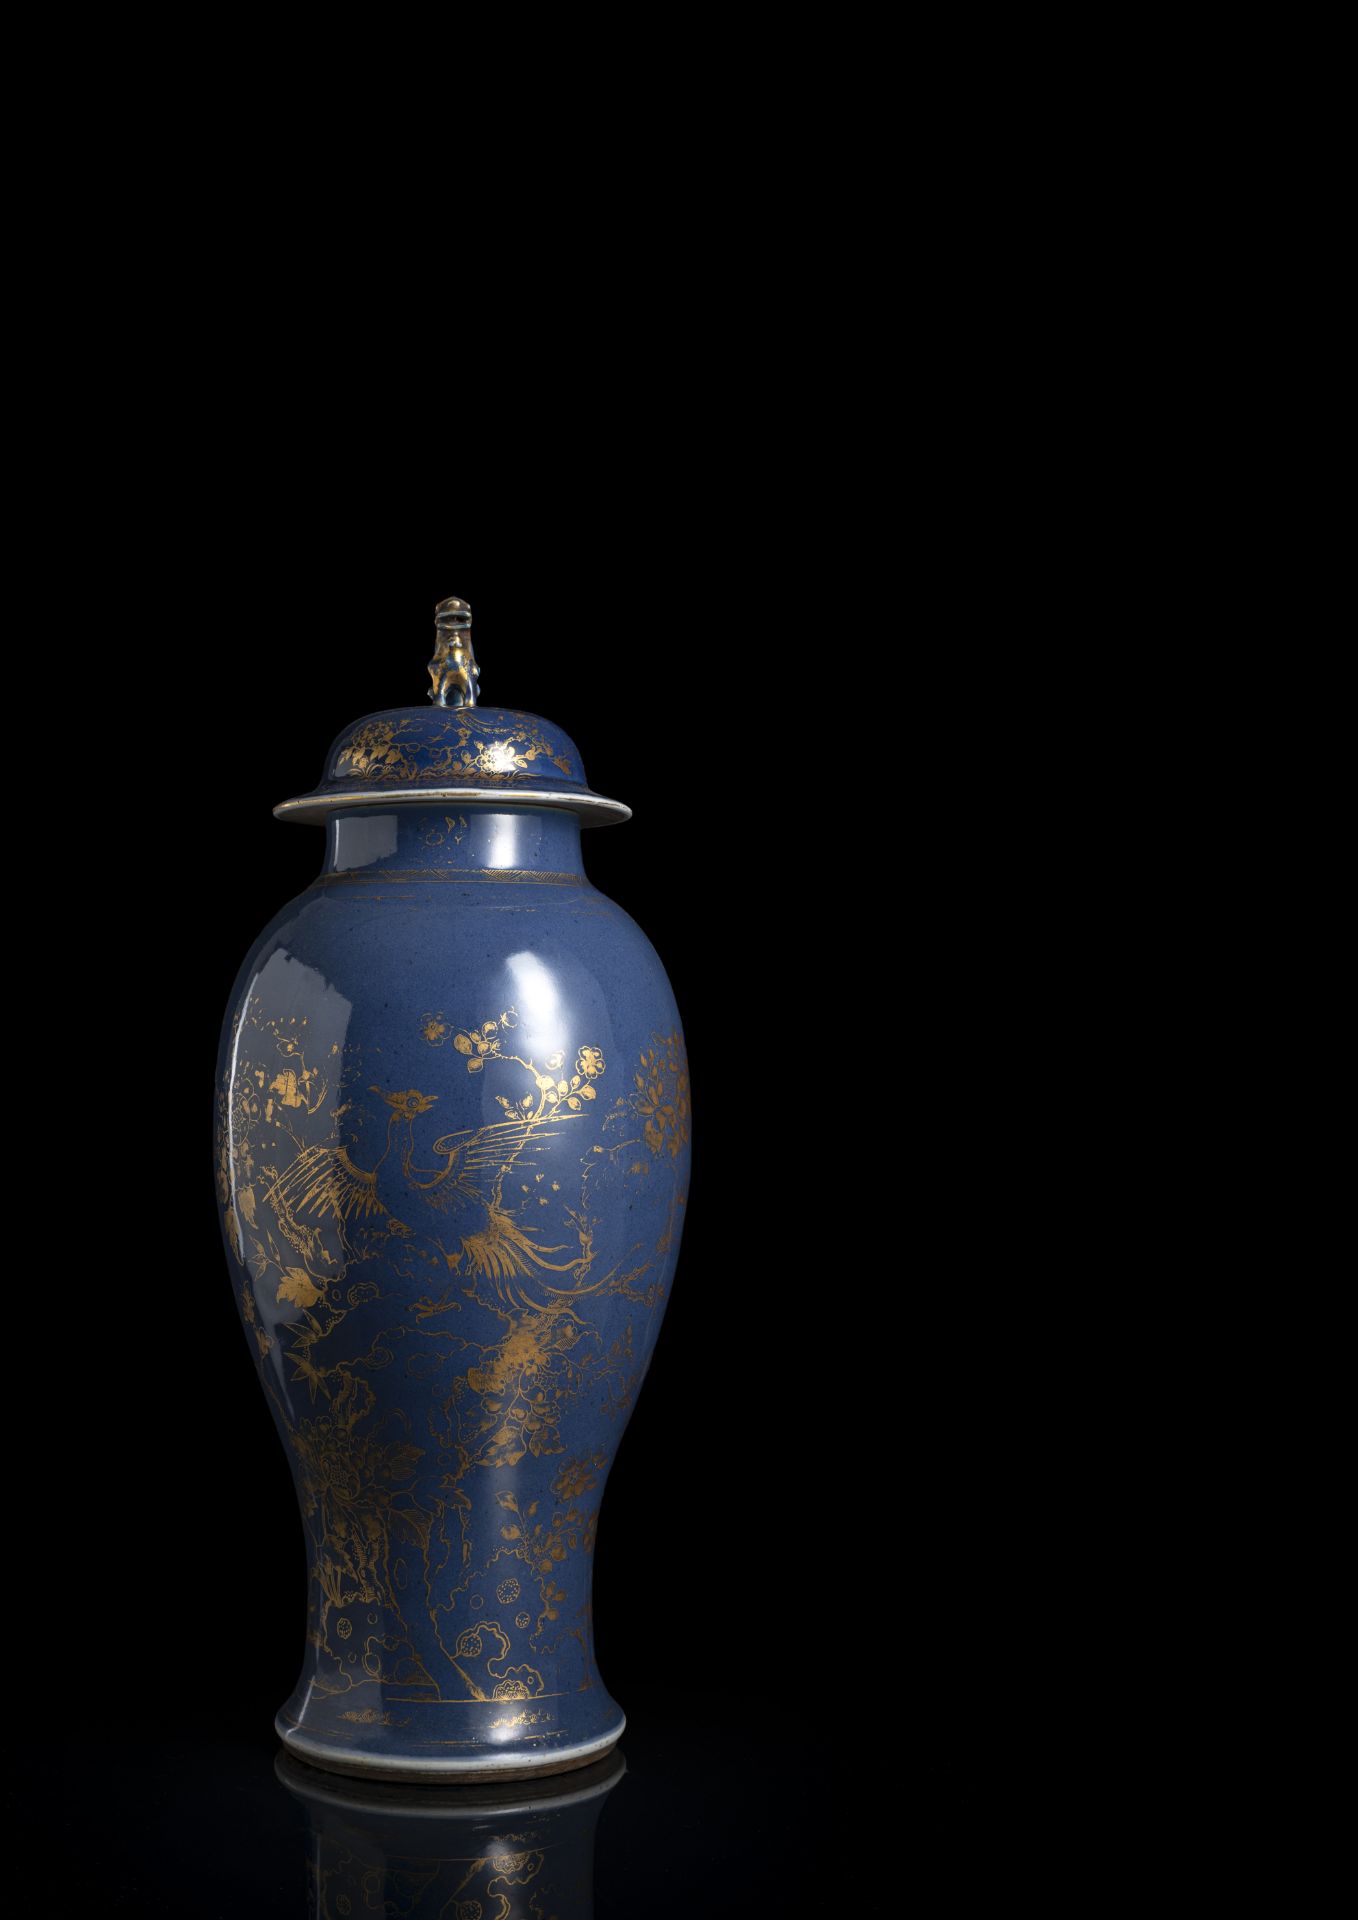 A FINE POWDERBLUE-GROUND GILT-PAINTED VASE AND COVER, THE COVER WITH LION HANDLE